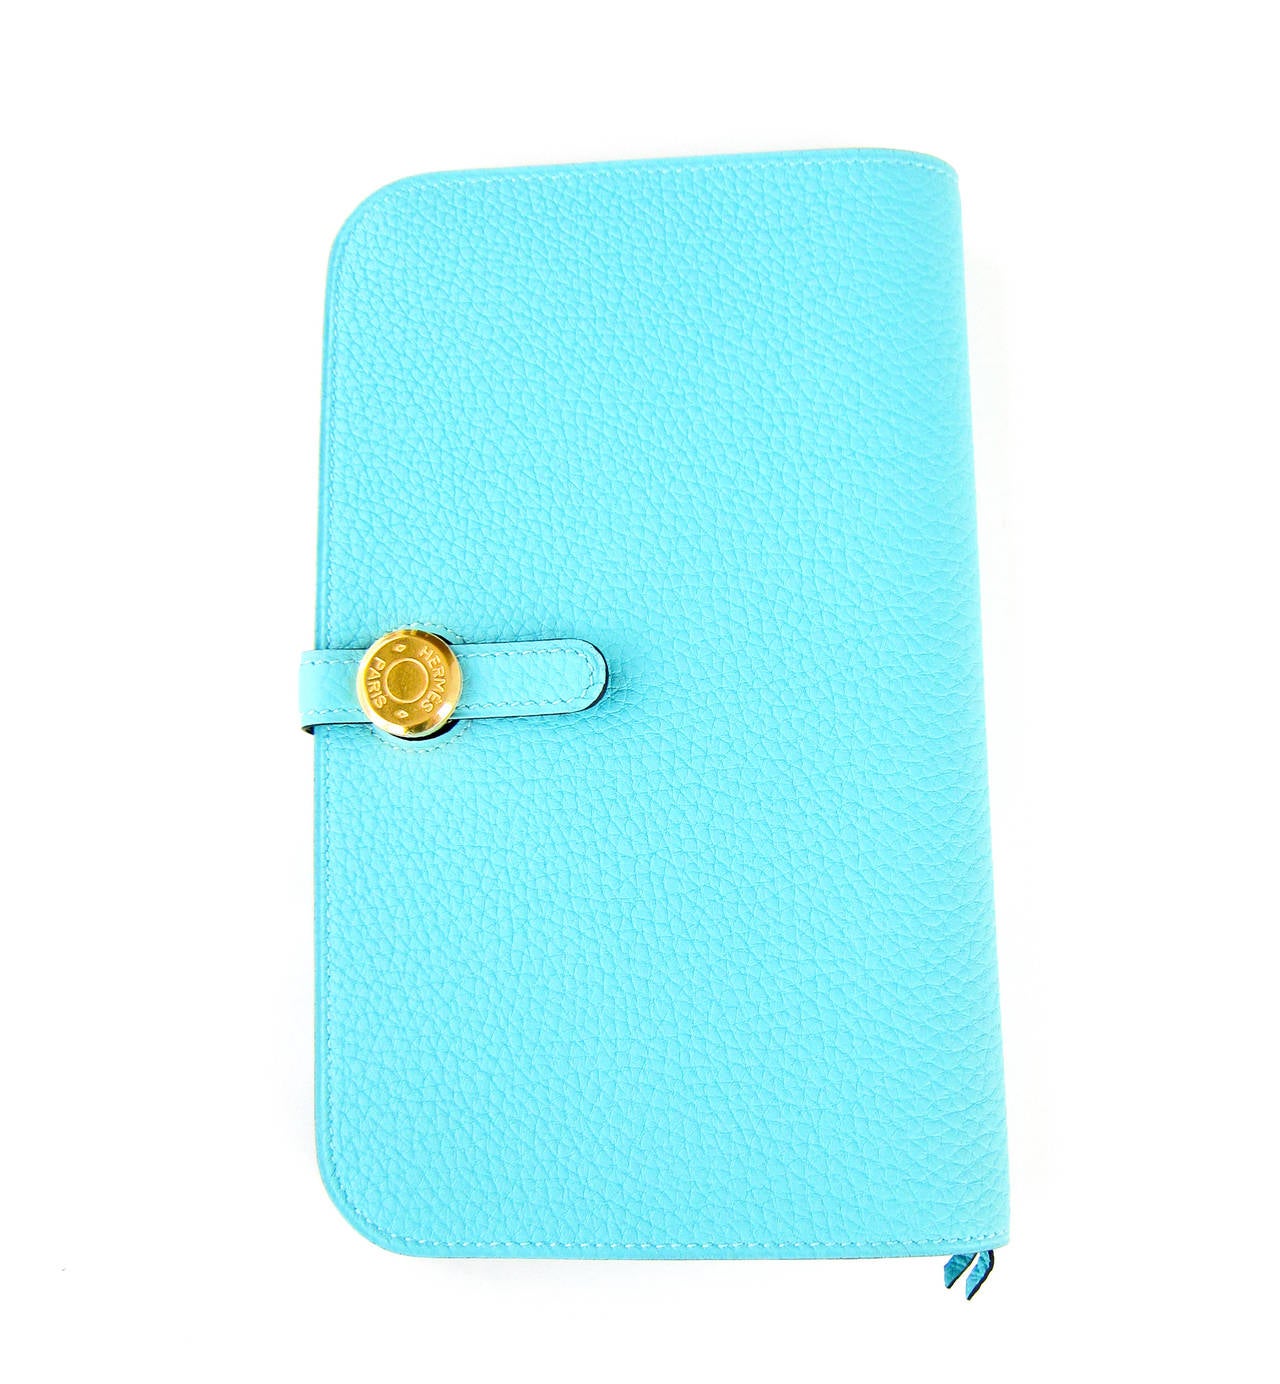 Hermes Blue Atoll Gold Hardware Togo Dogon Duo Leather Wallet Clutch Bag Amaze 2